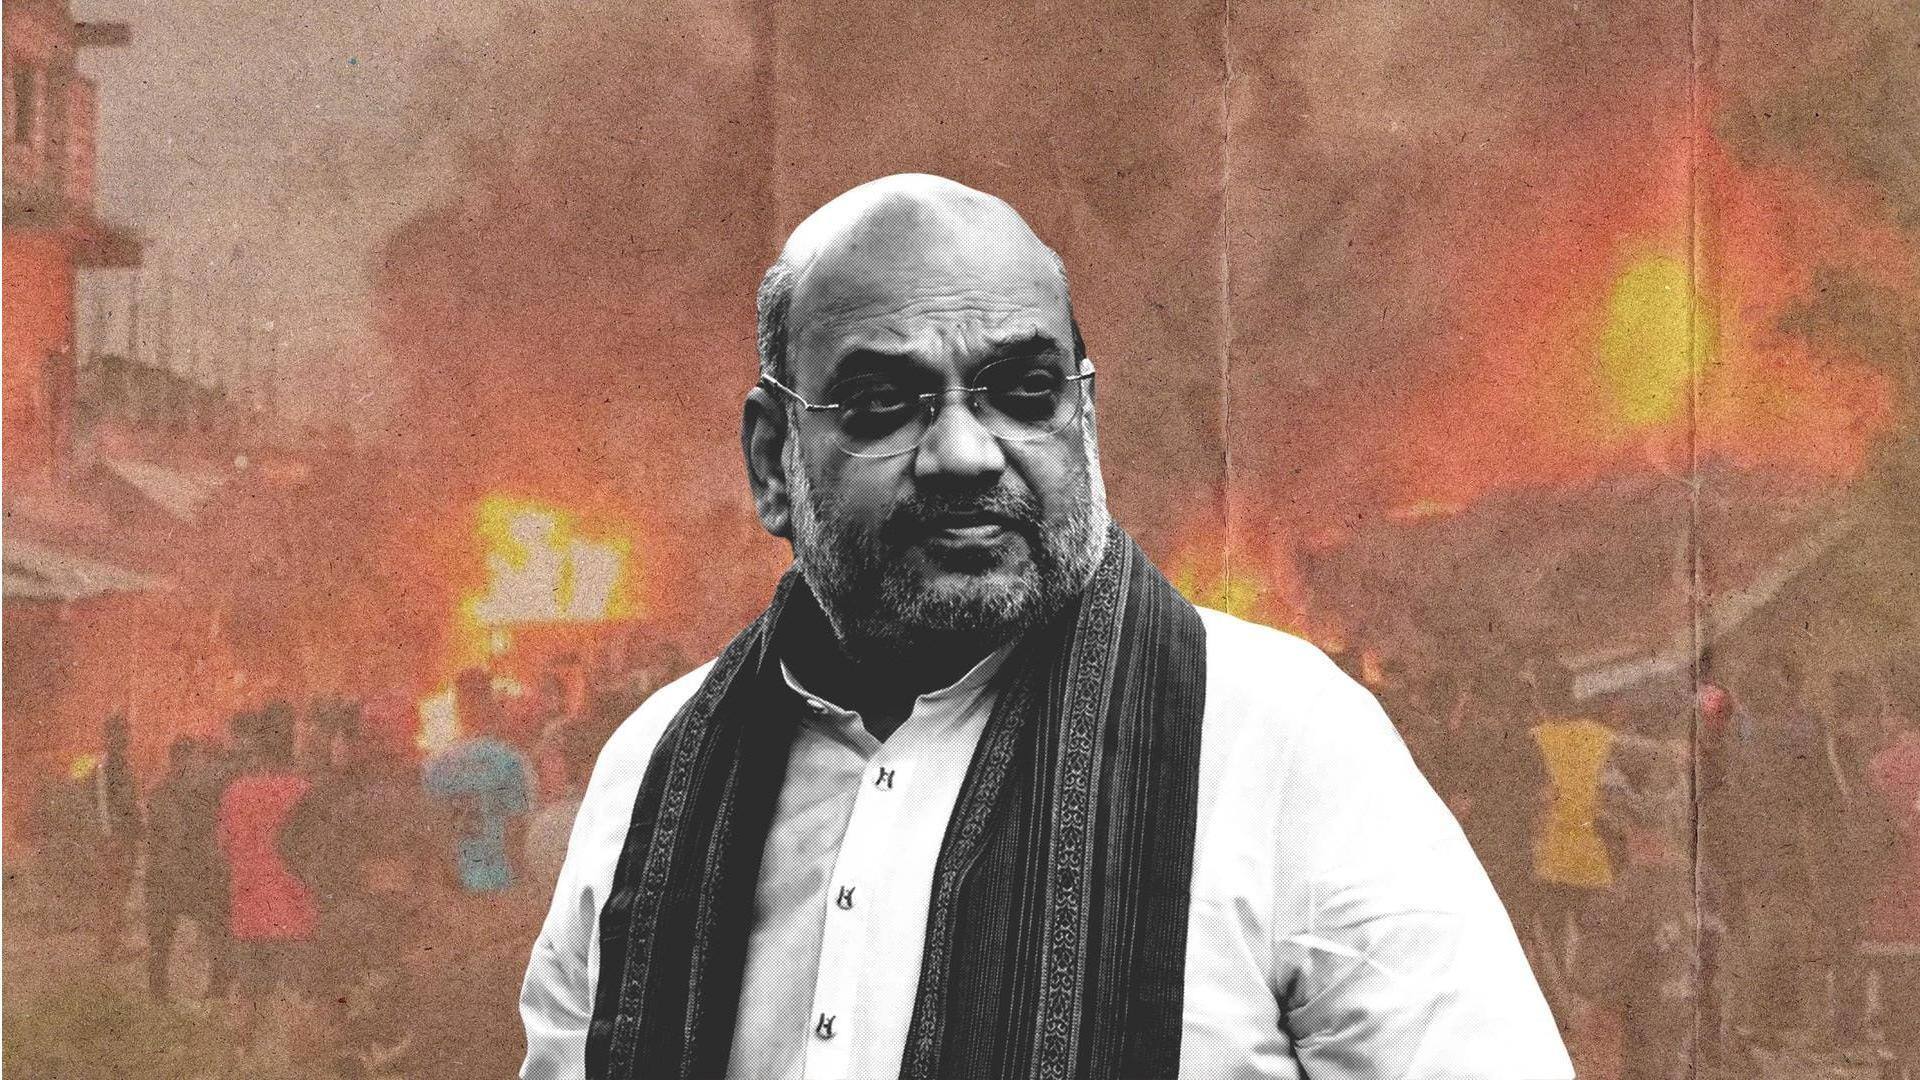 Manipur's Imphal witnessed more violence after Amit Shah's visit: Congress